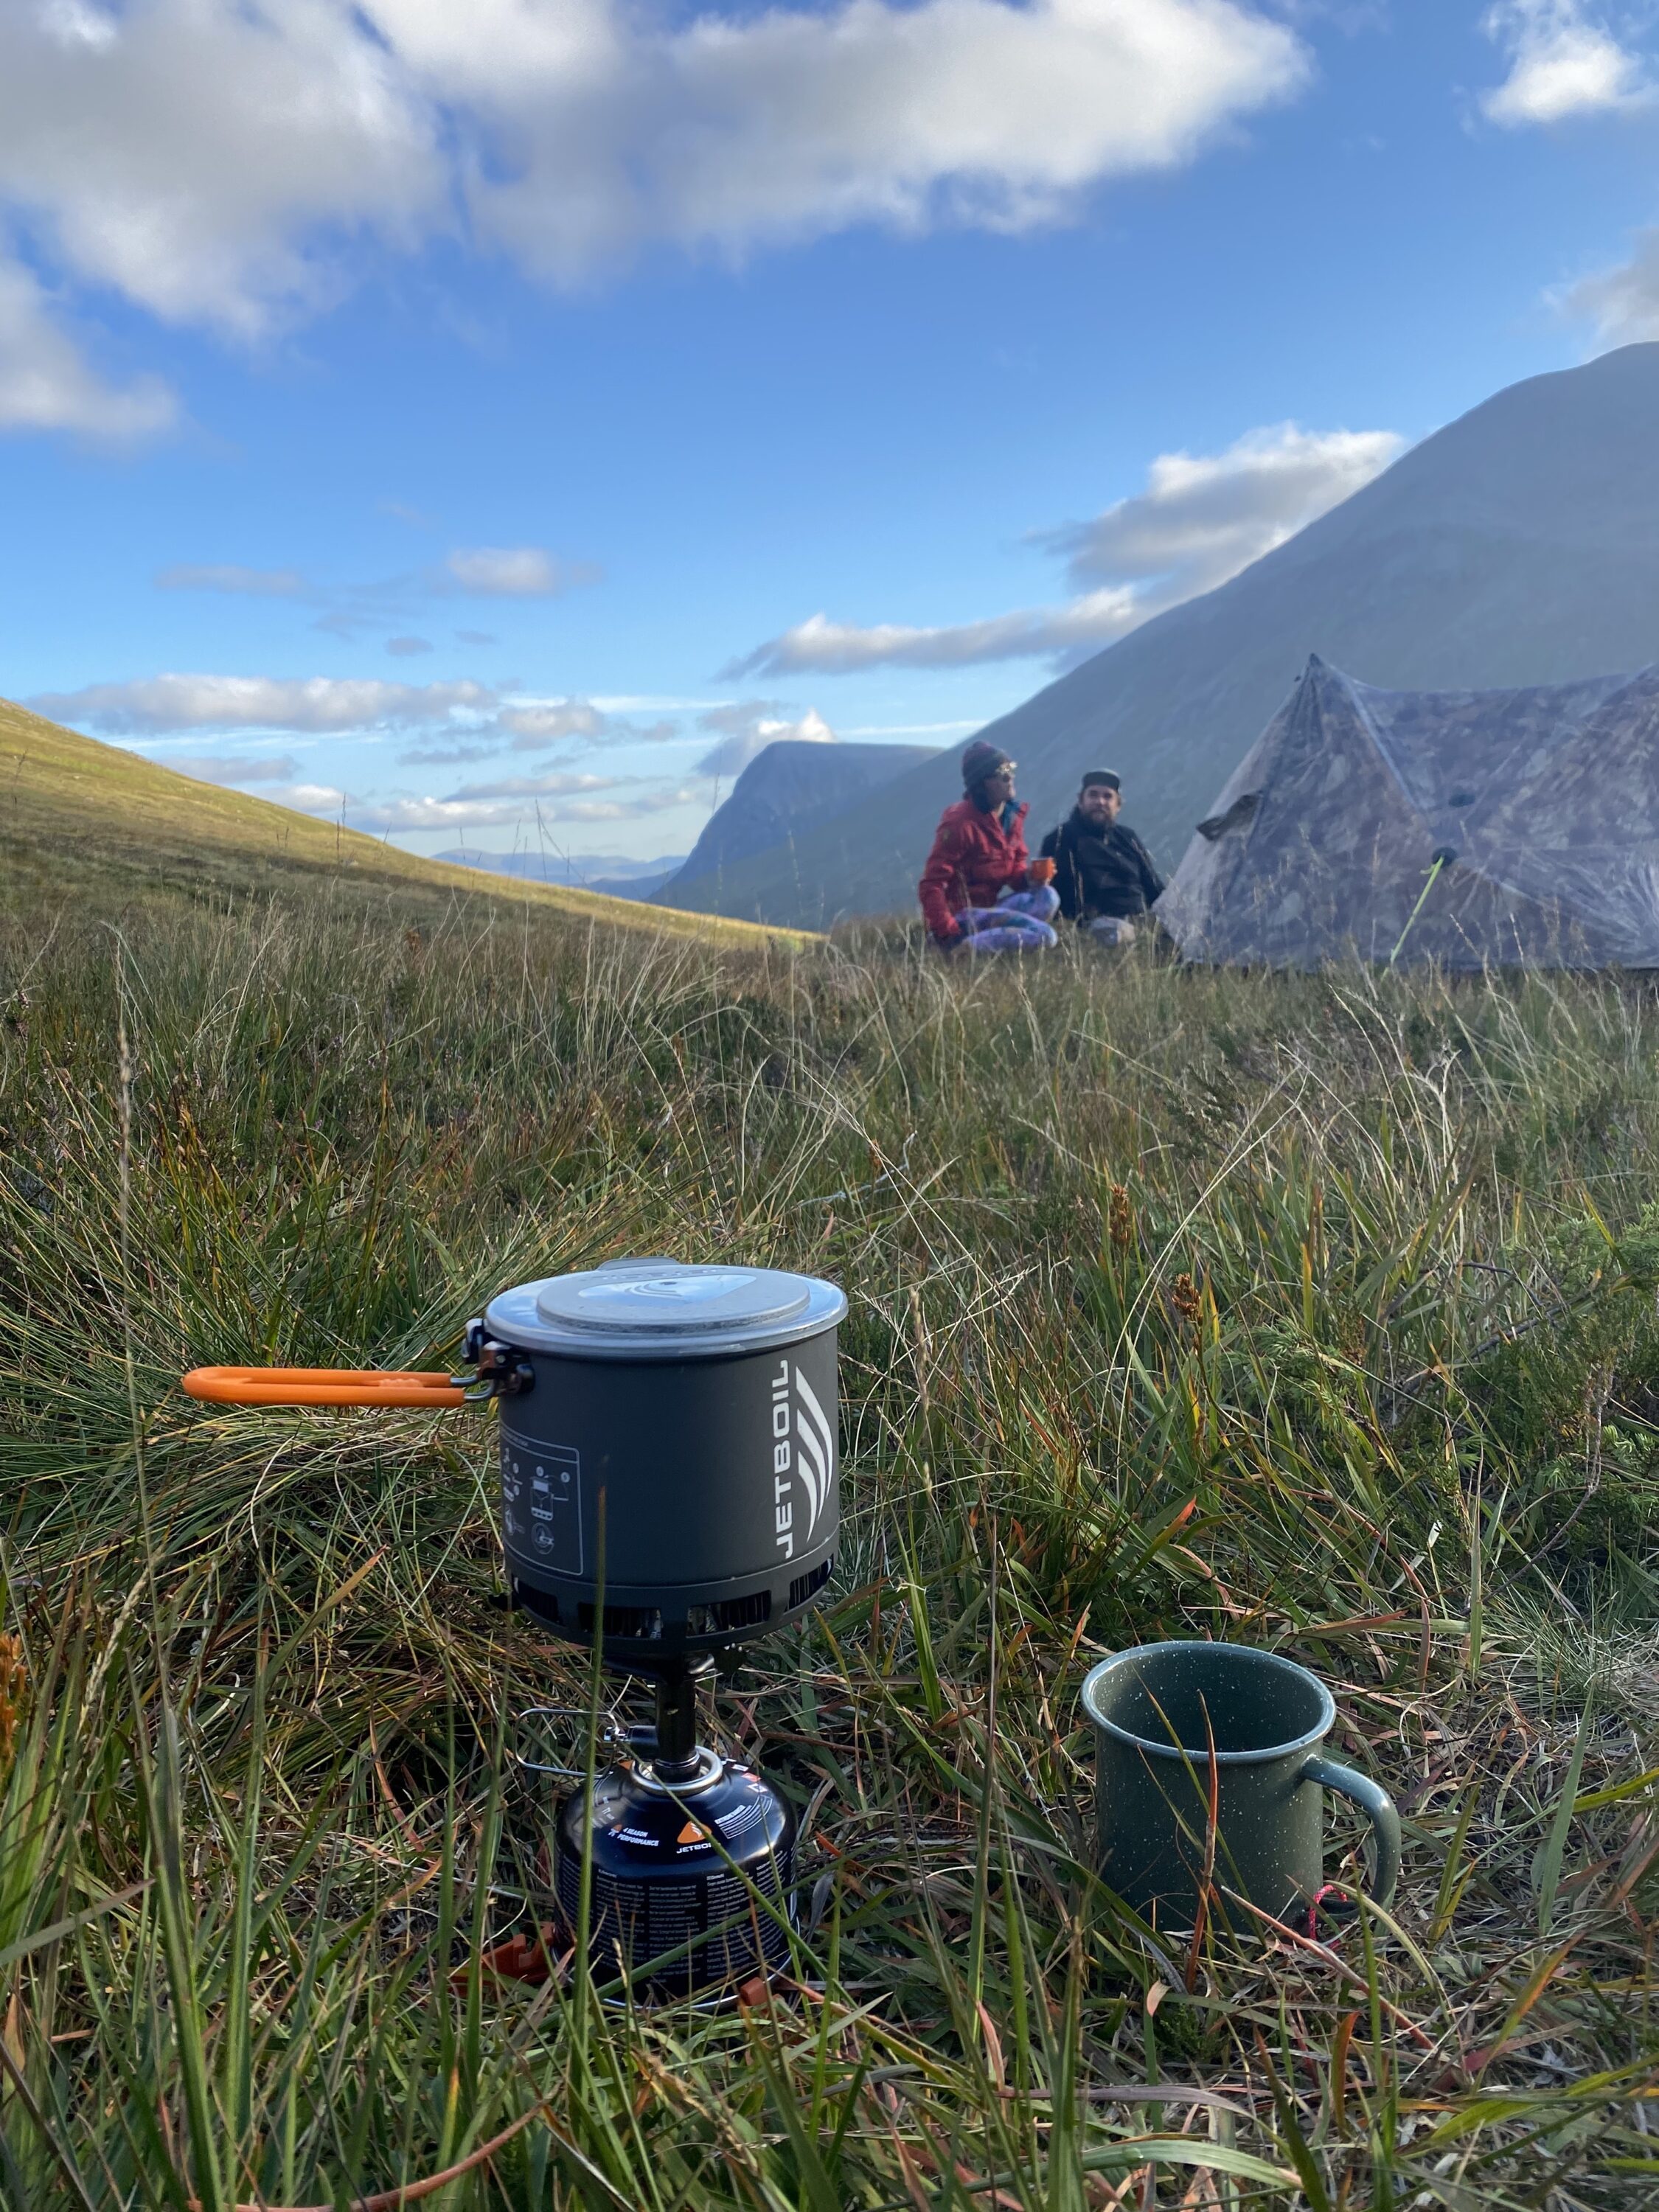 First look: Jetboil Stash lightweight backpacking stove reviewed